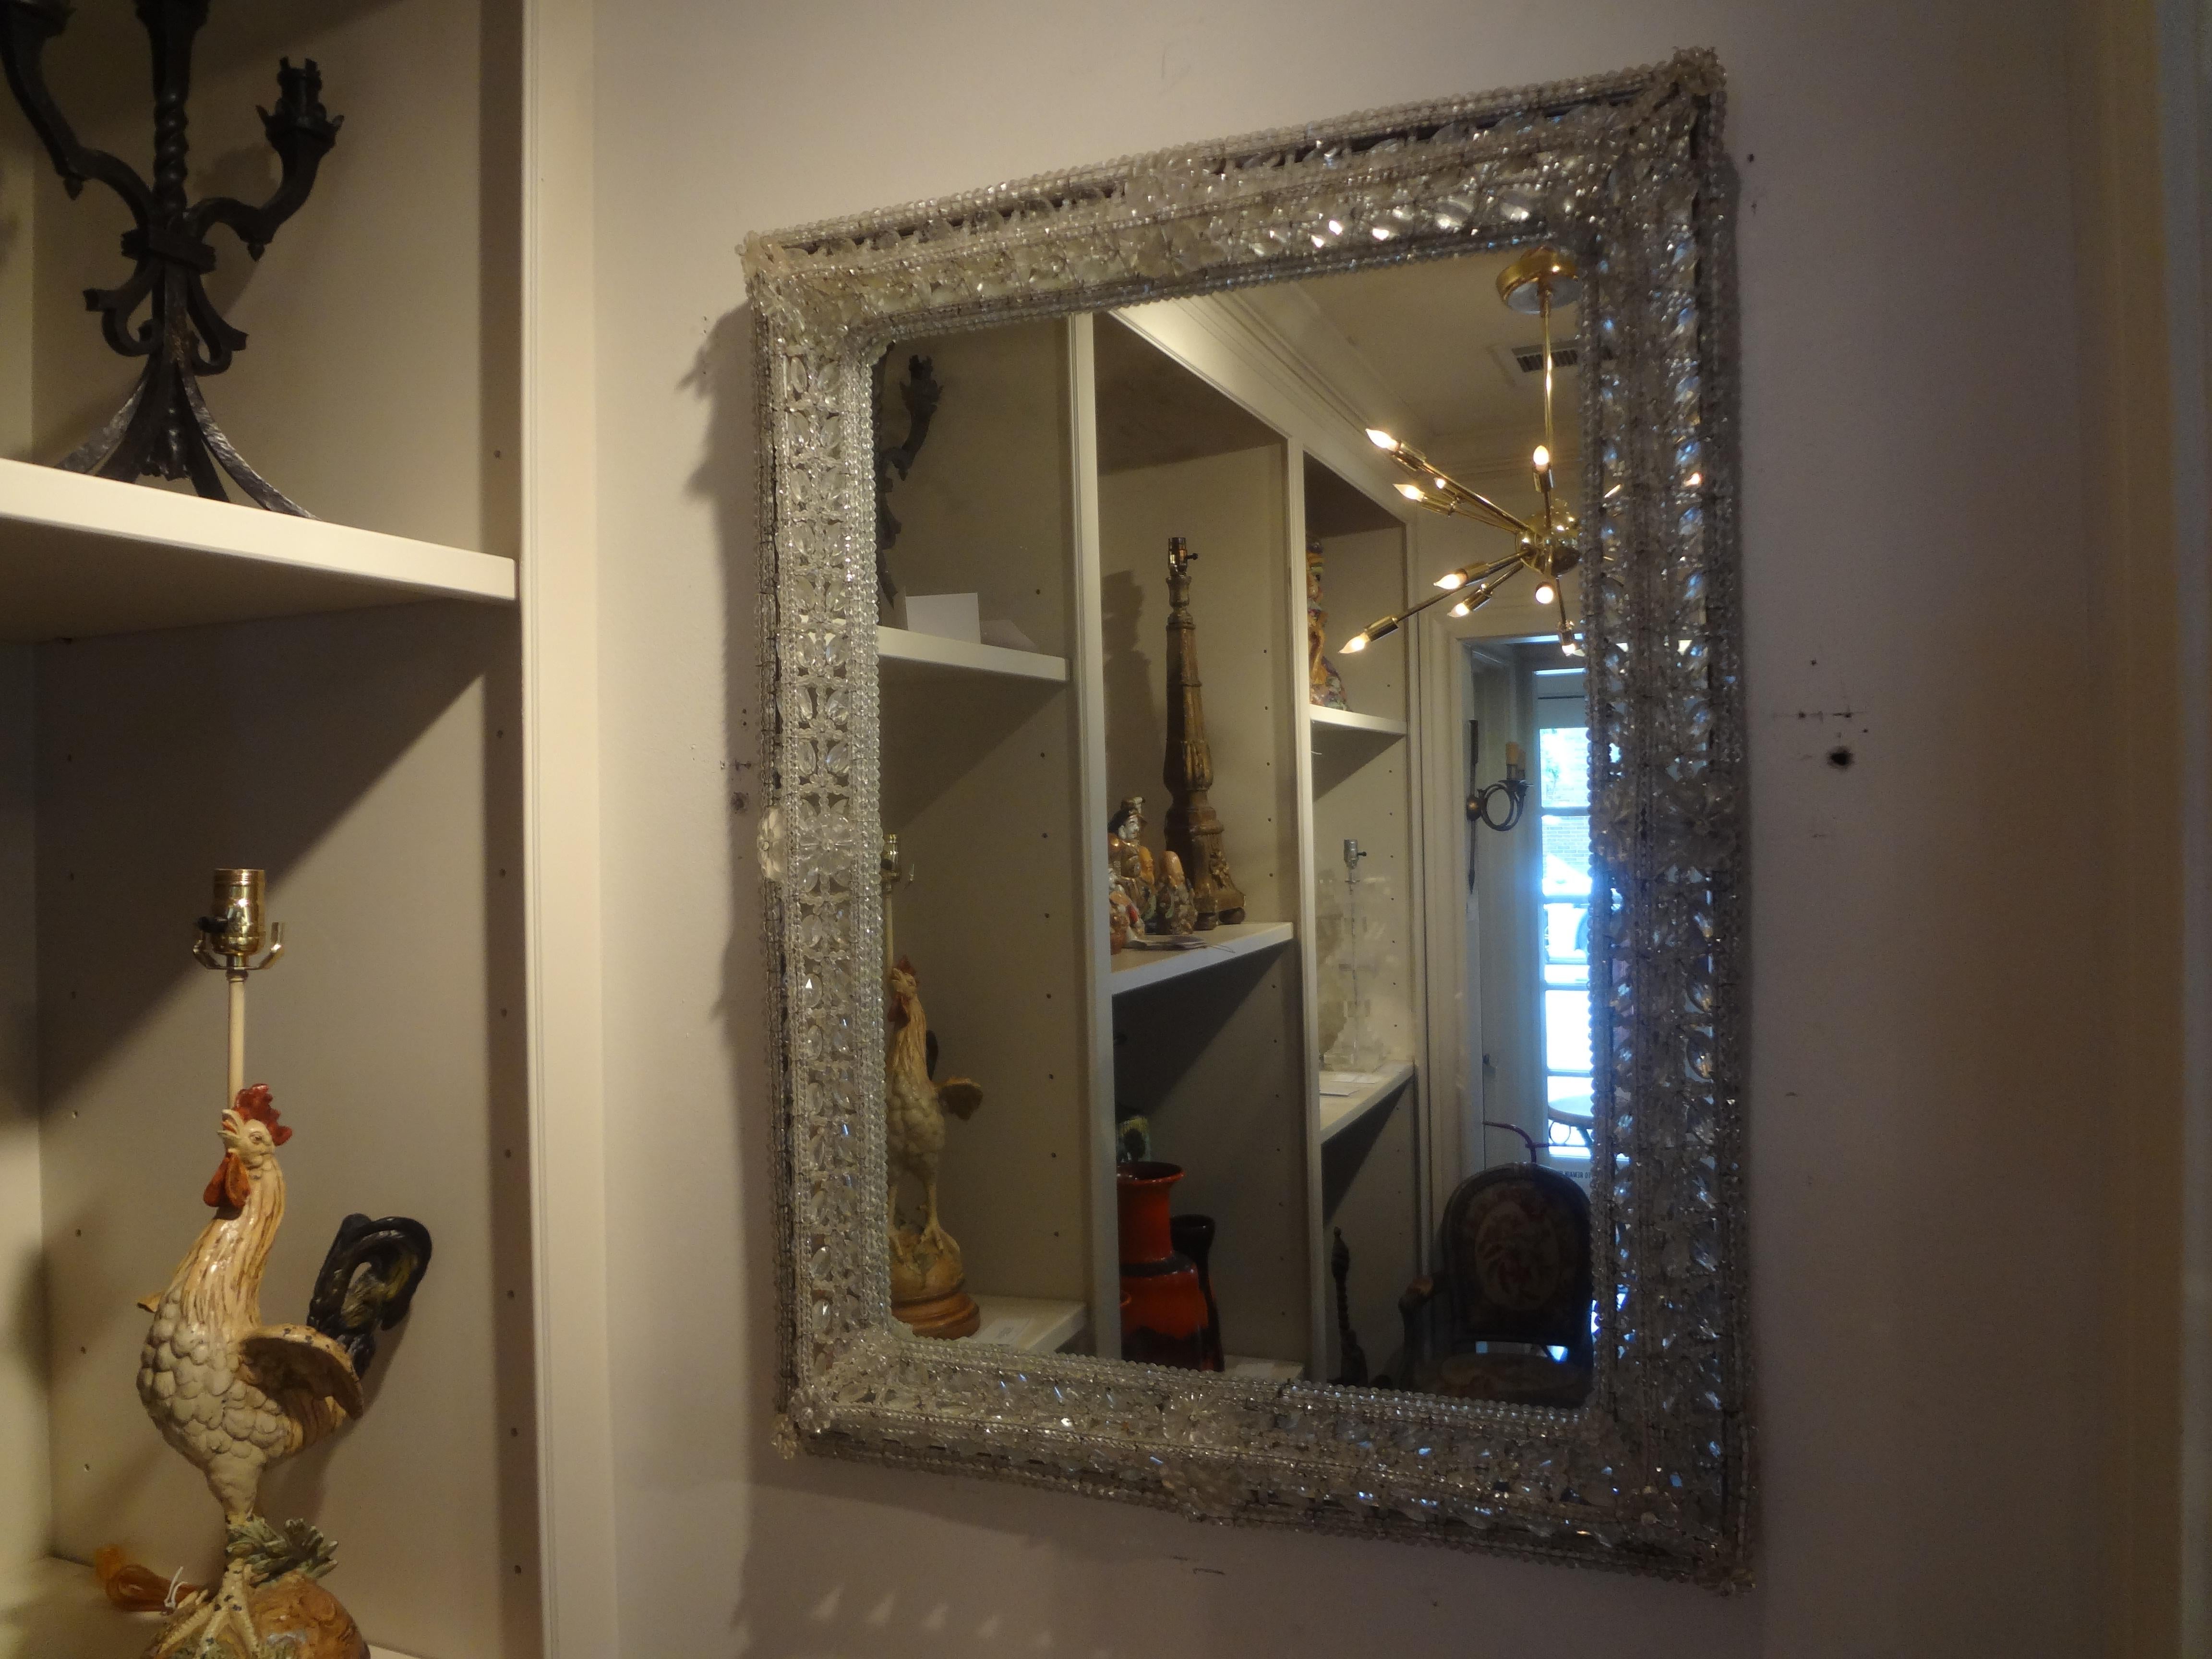 Antique Venetian beaded crystal mirror. This stunning Venetian mirror with raised beaded crystals can be displayed either vertically or horizontally. Most unique and stunning!